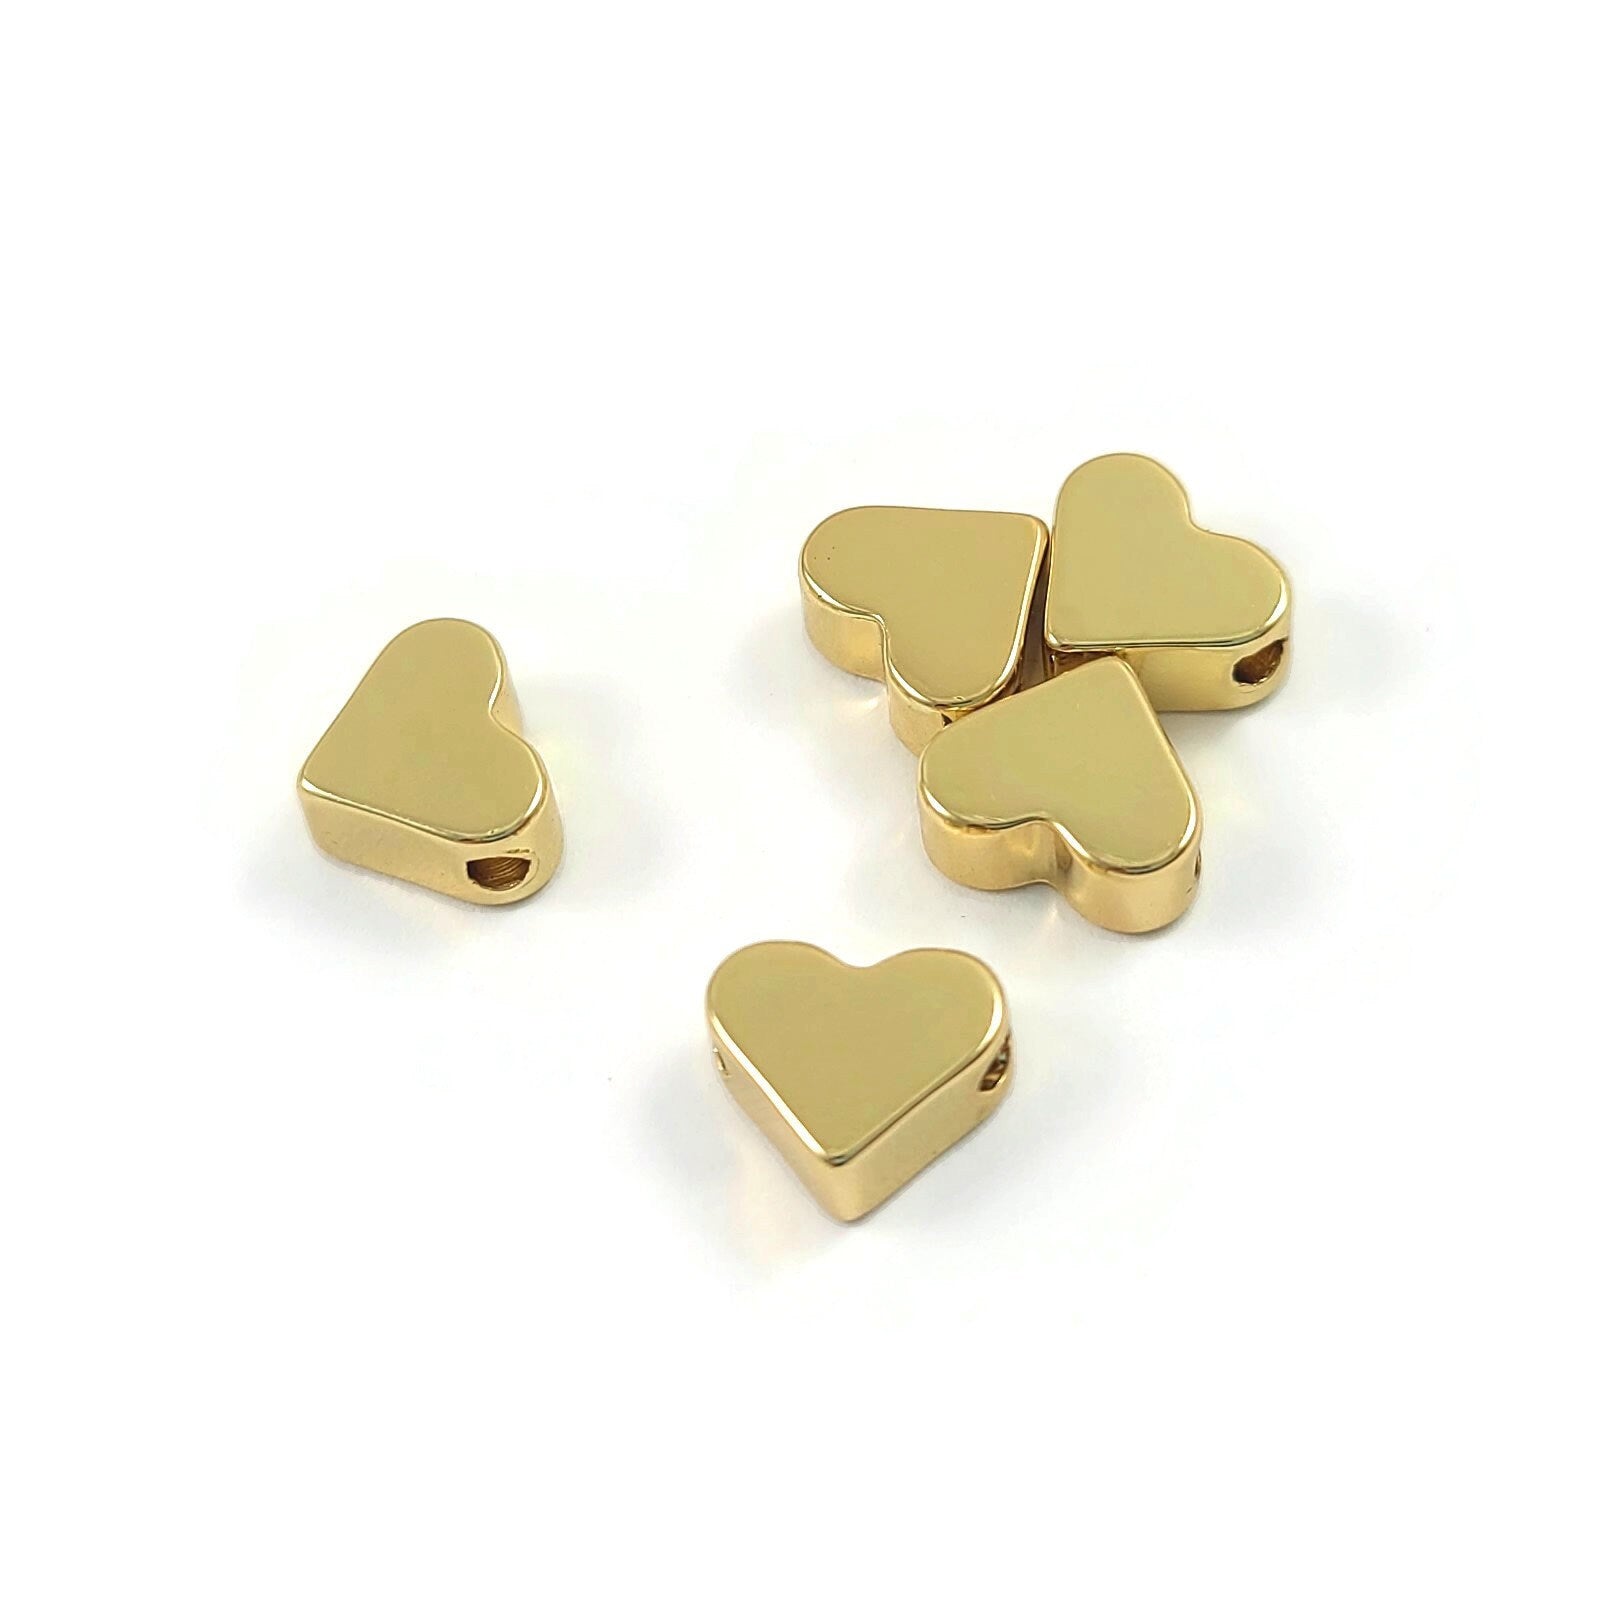 18K real gold plated heart beads, Hypoallergenic nickel free spacer beads, Bracelet making, Jewelry supplies